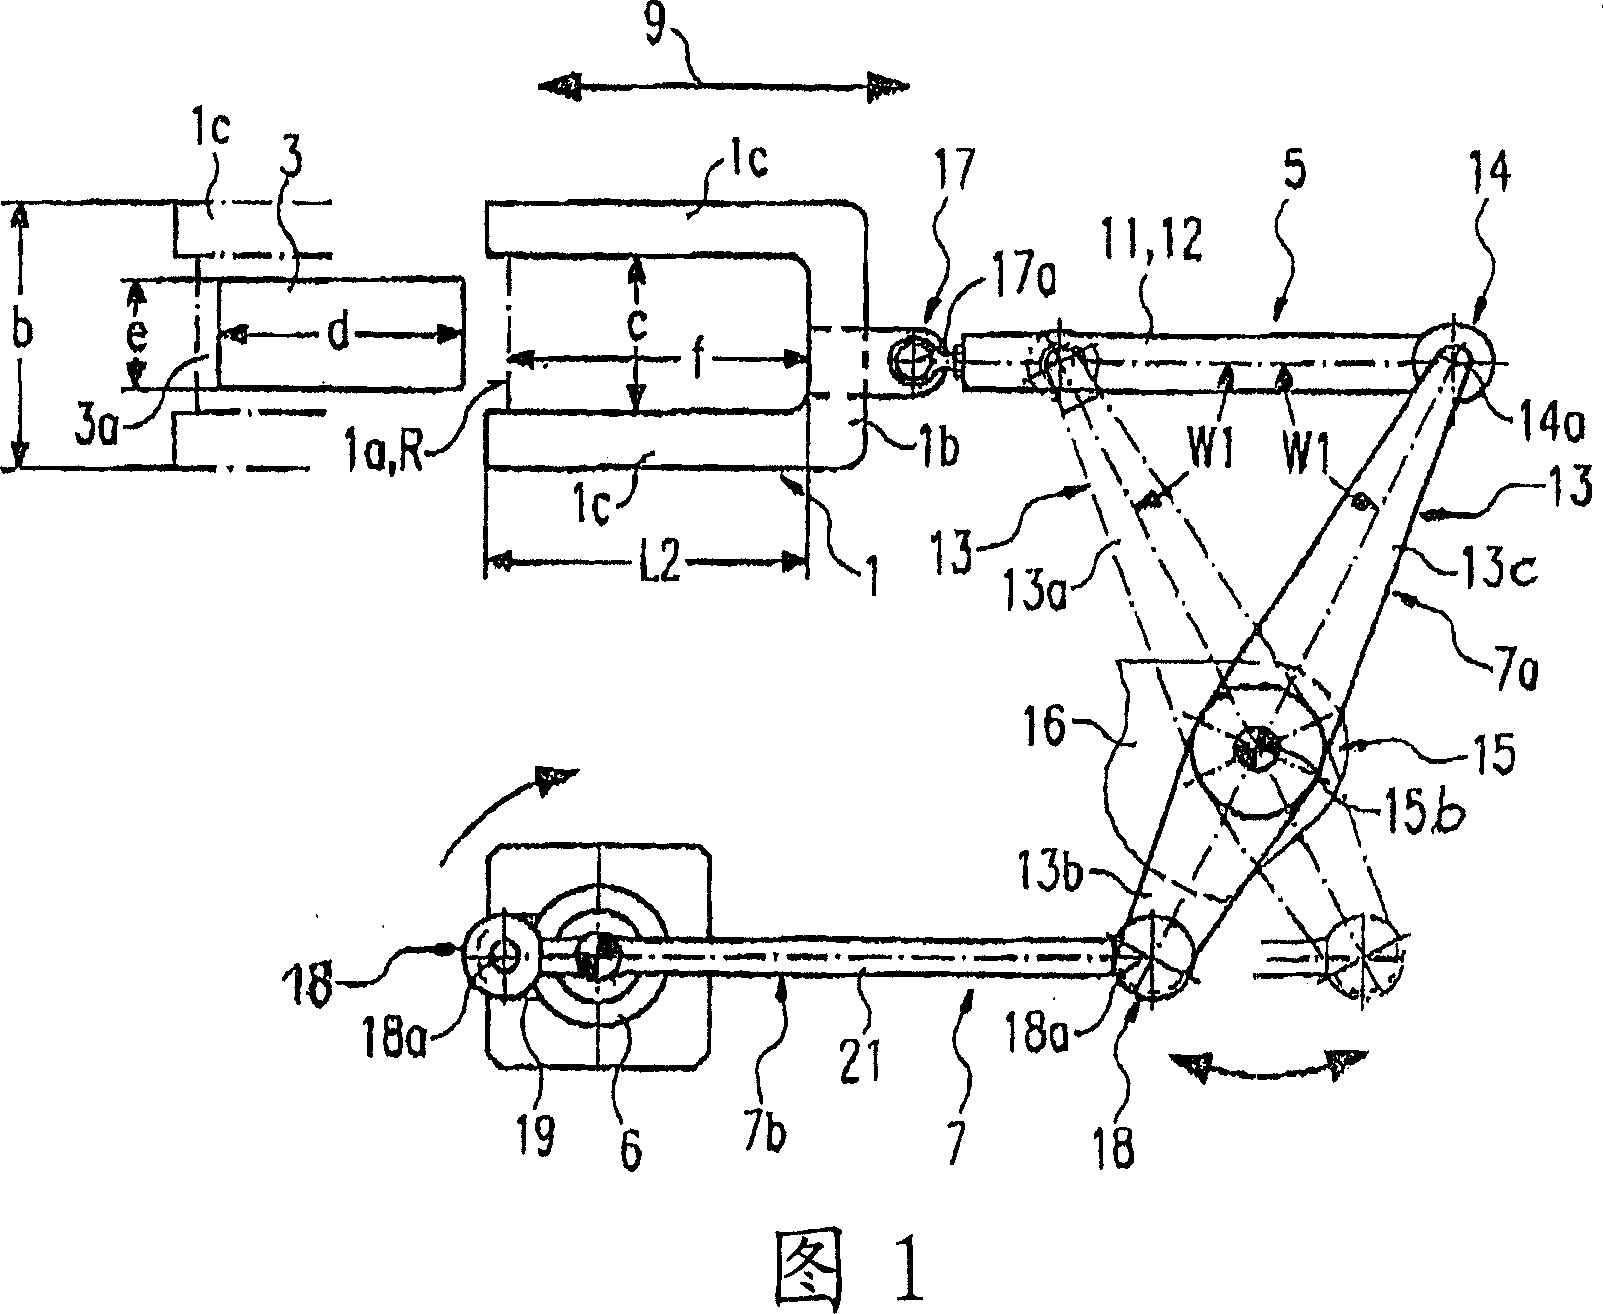 Apparatus for cutting of an extruded strand of plastically deformable material, preferably of clay